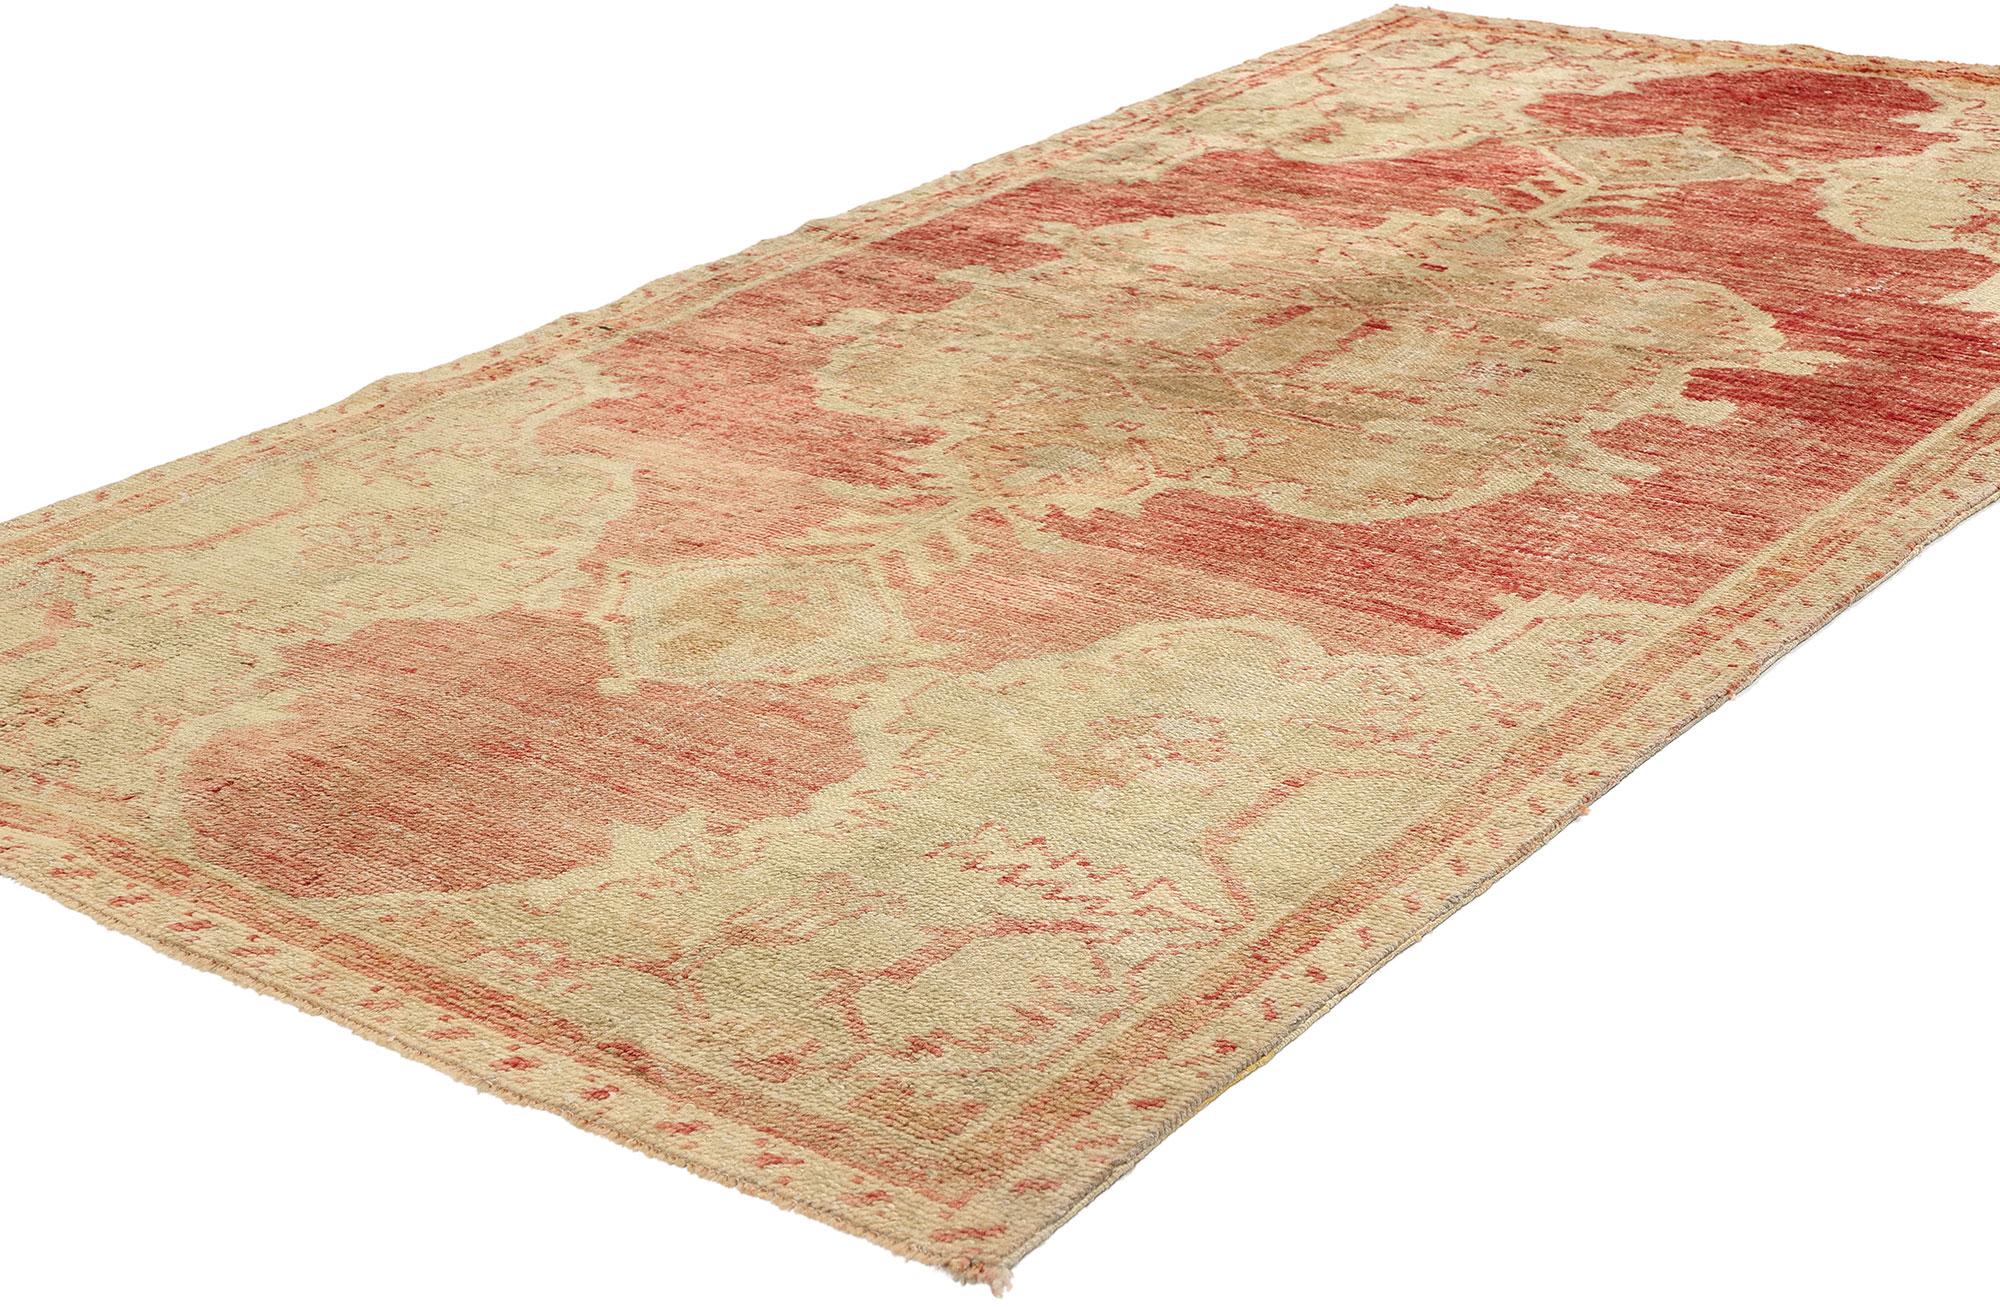 52070 Distressed Vintage Turkish Oushak Rug, 04'01 x 08'01. Infused with the timeless elegance of French Provincial style, this hand-knotted wool distressed vintage Turkish Oushak rug exudes a sense of rustic charm and relaxed refinement. At the